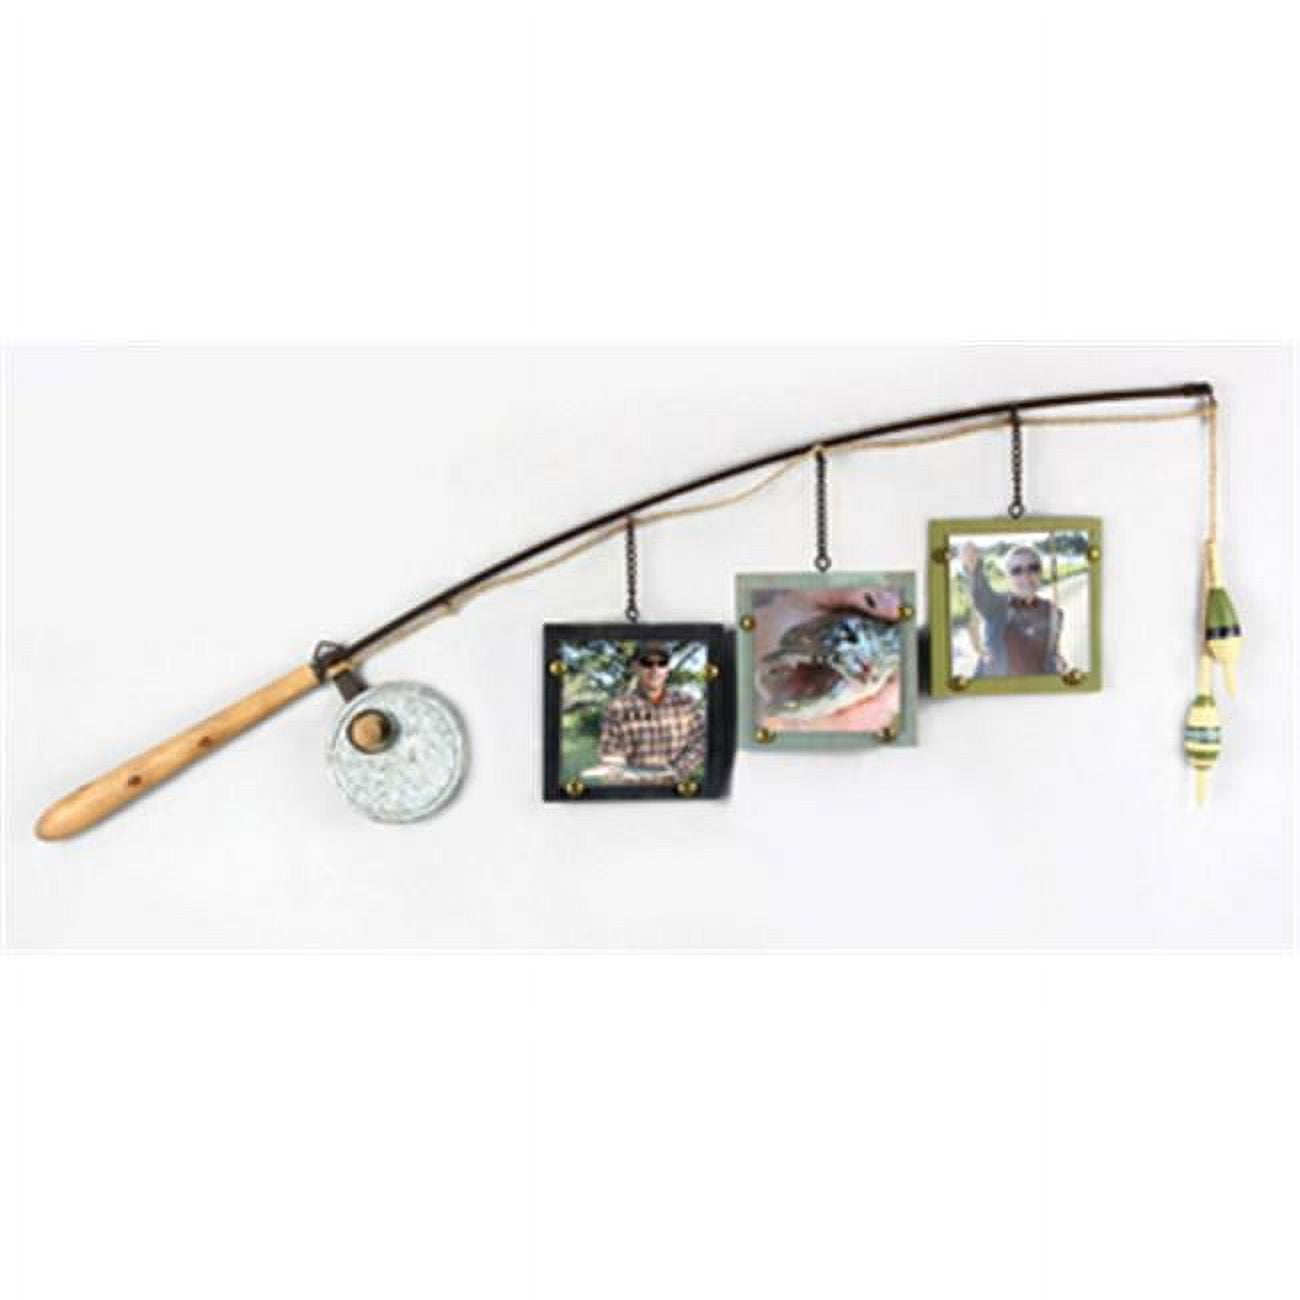 Youngs 14145 Fish Pole Triple Photo Frame - Wood